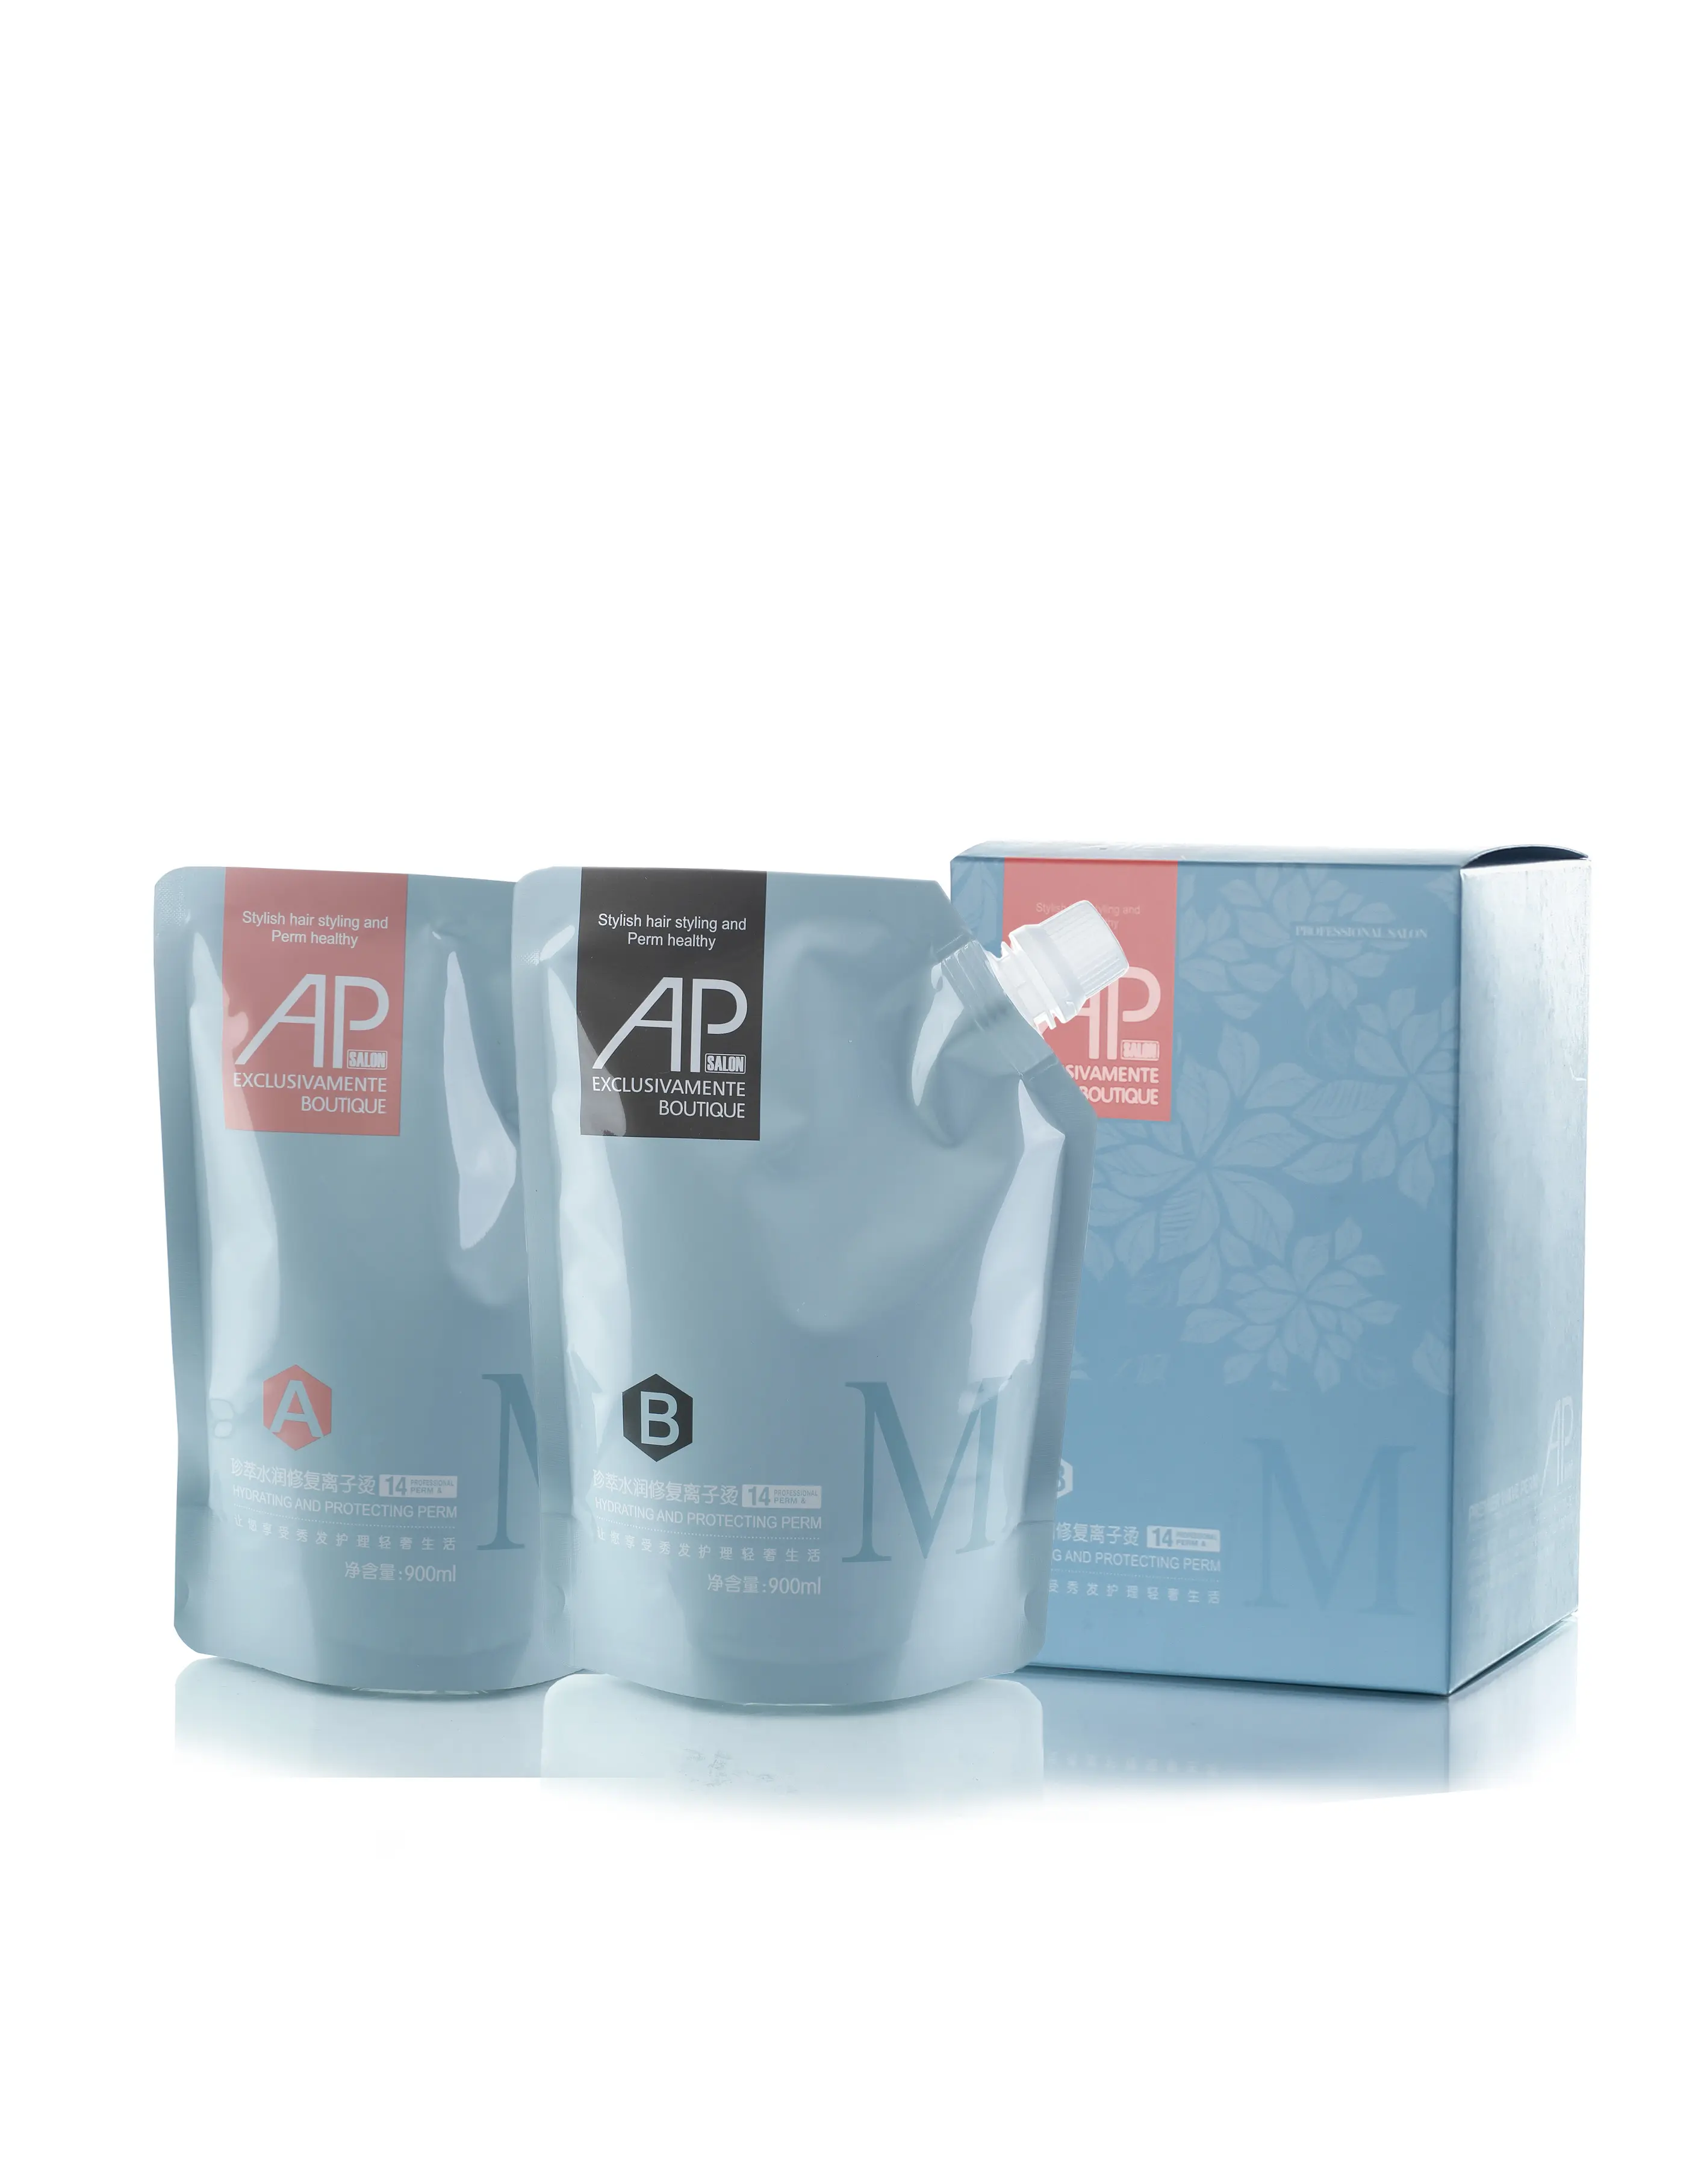 High Quality AP Brand Professional and Salon Use Permanent Hair Straightening Cream